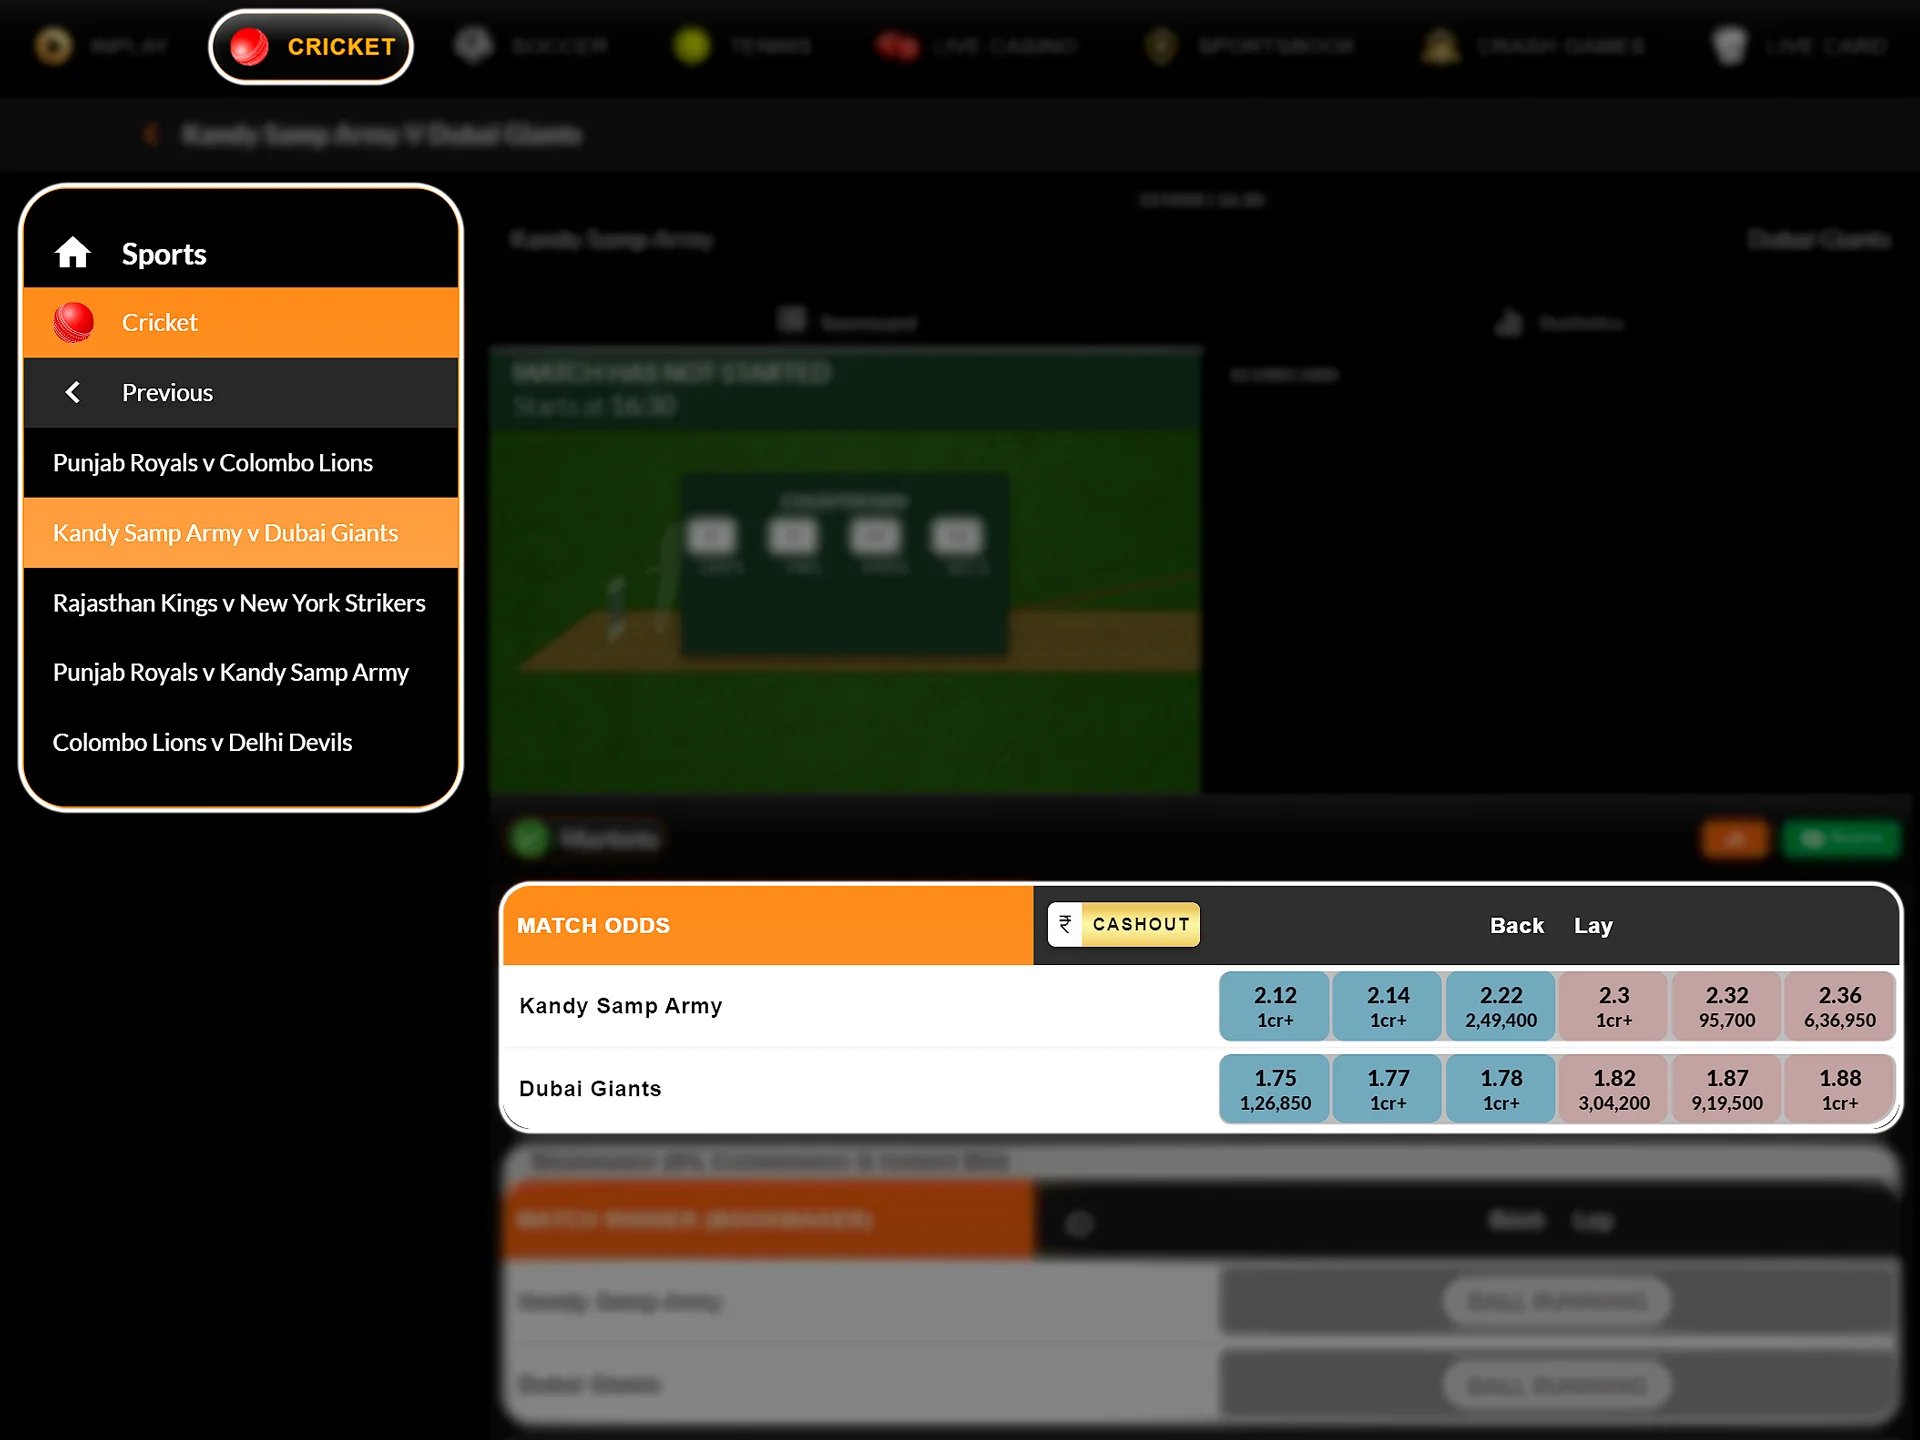 Go to the cricket section of the Fairplay website, select an event and place your bet.